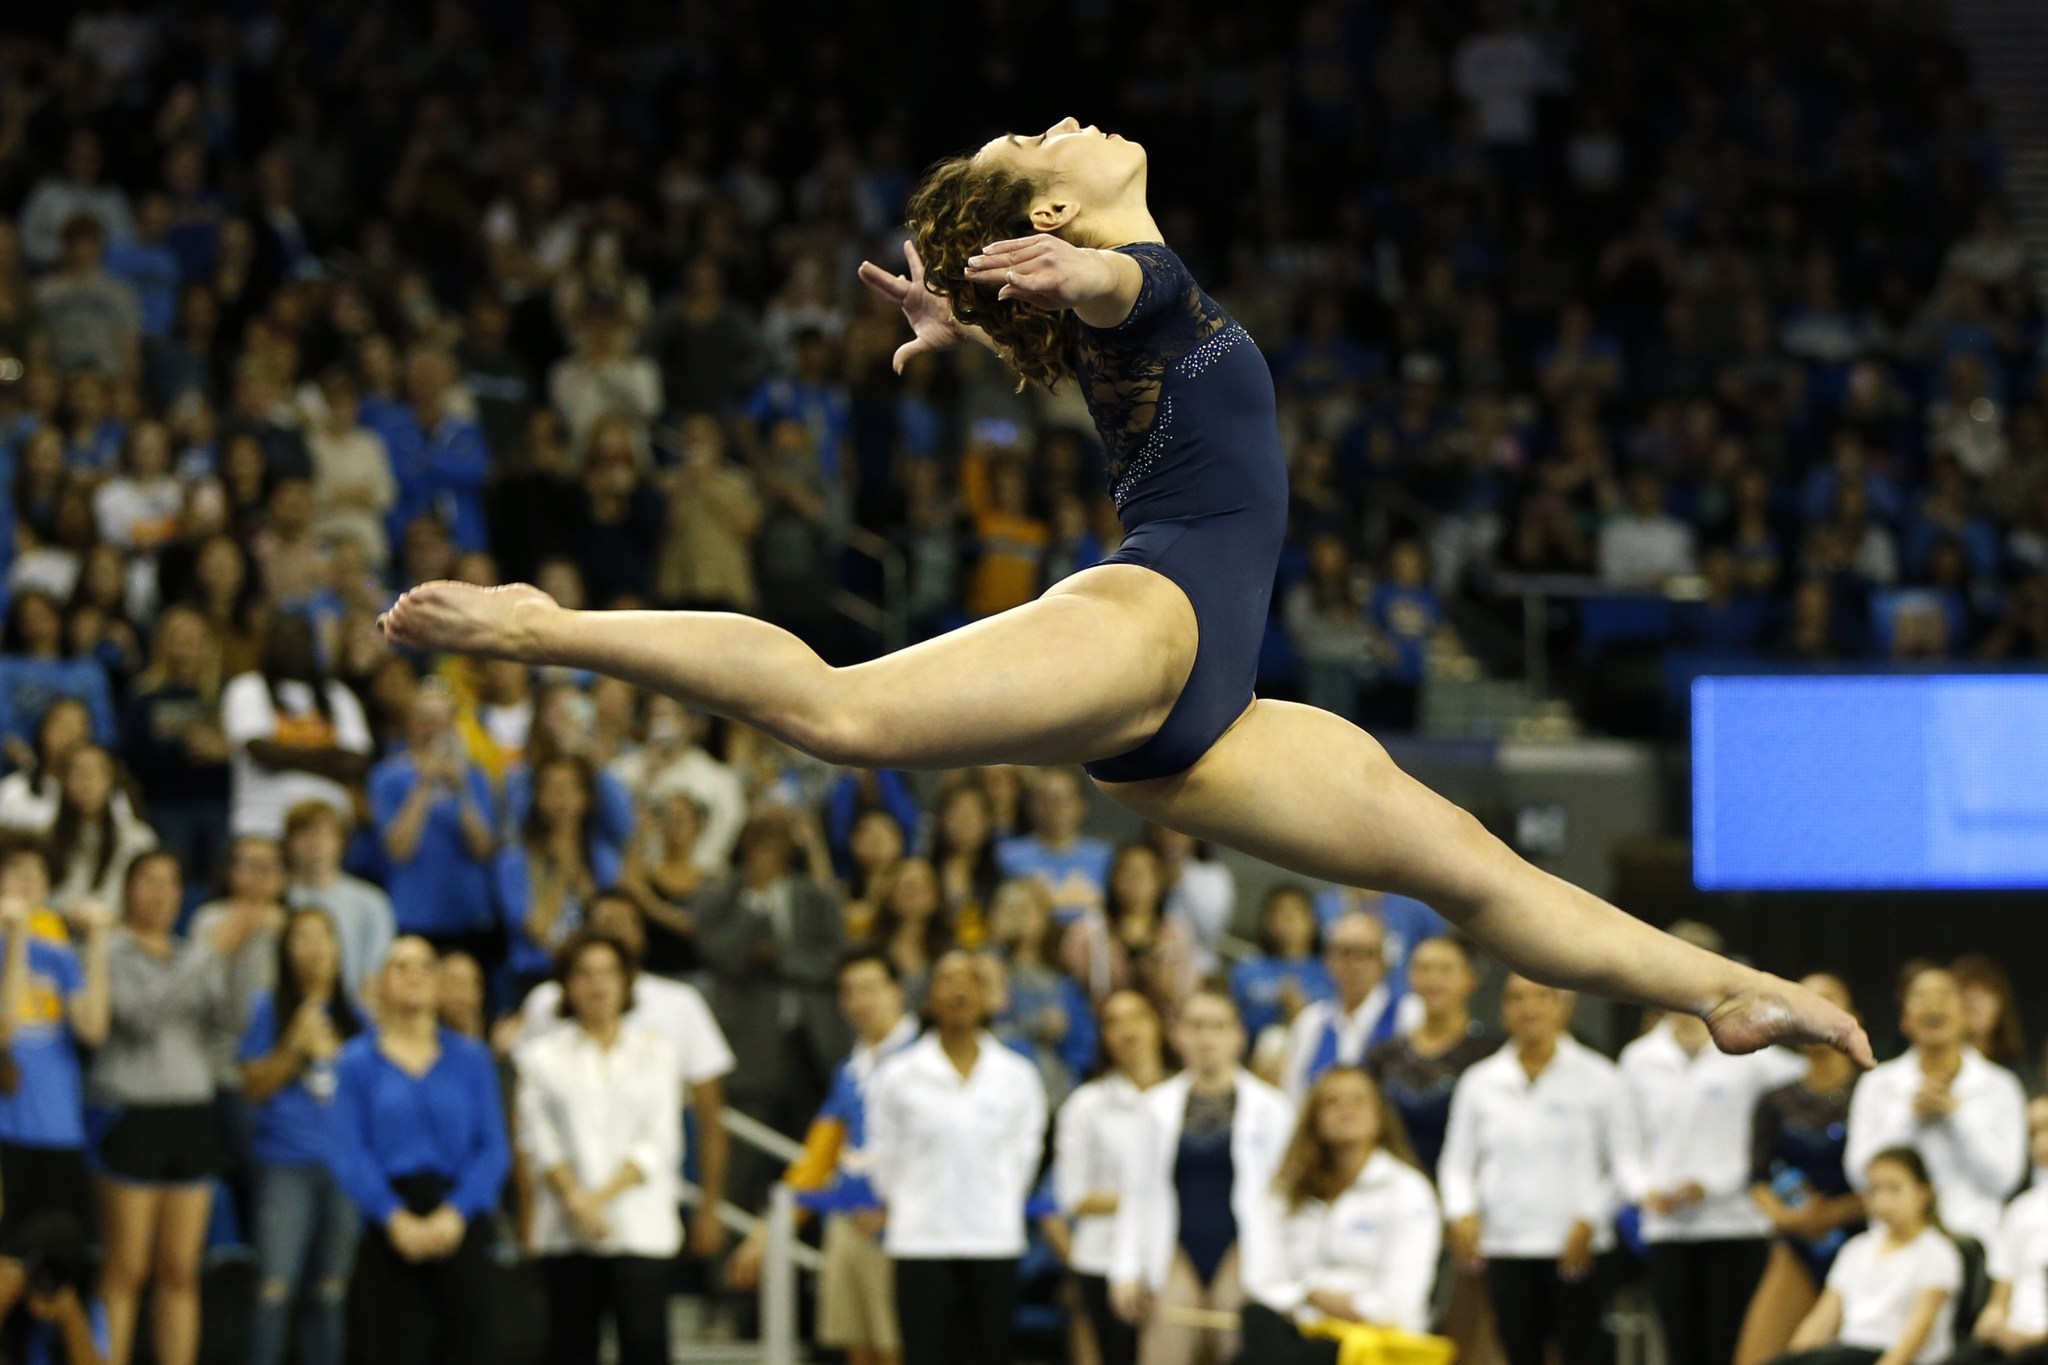 That was until the appearance of gymnast Katelyn Ohashi (1.47m